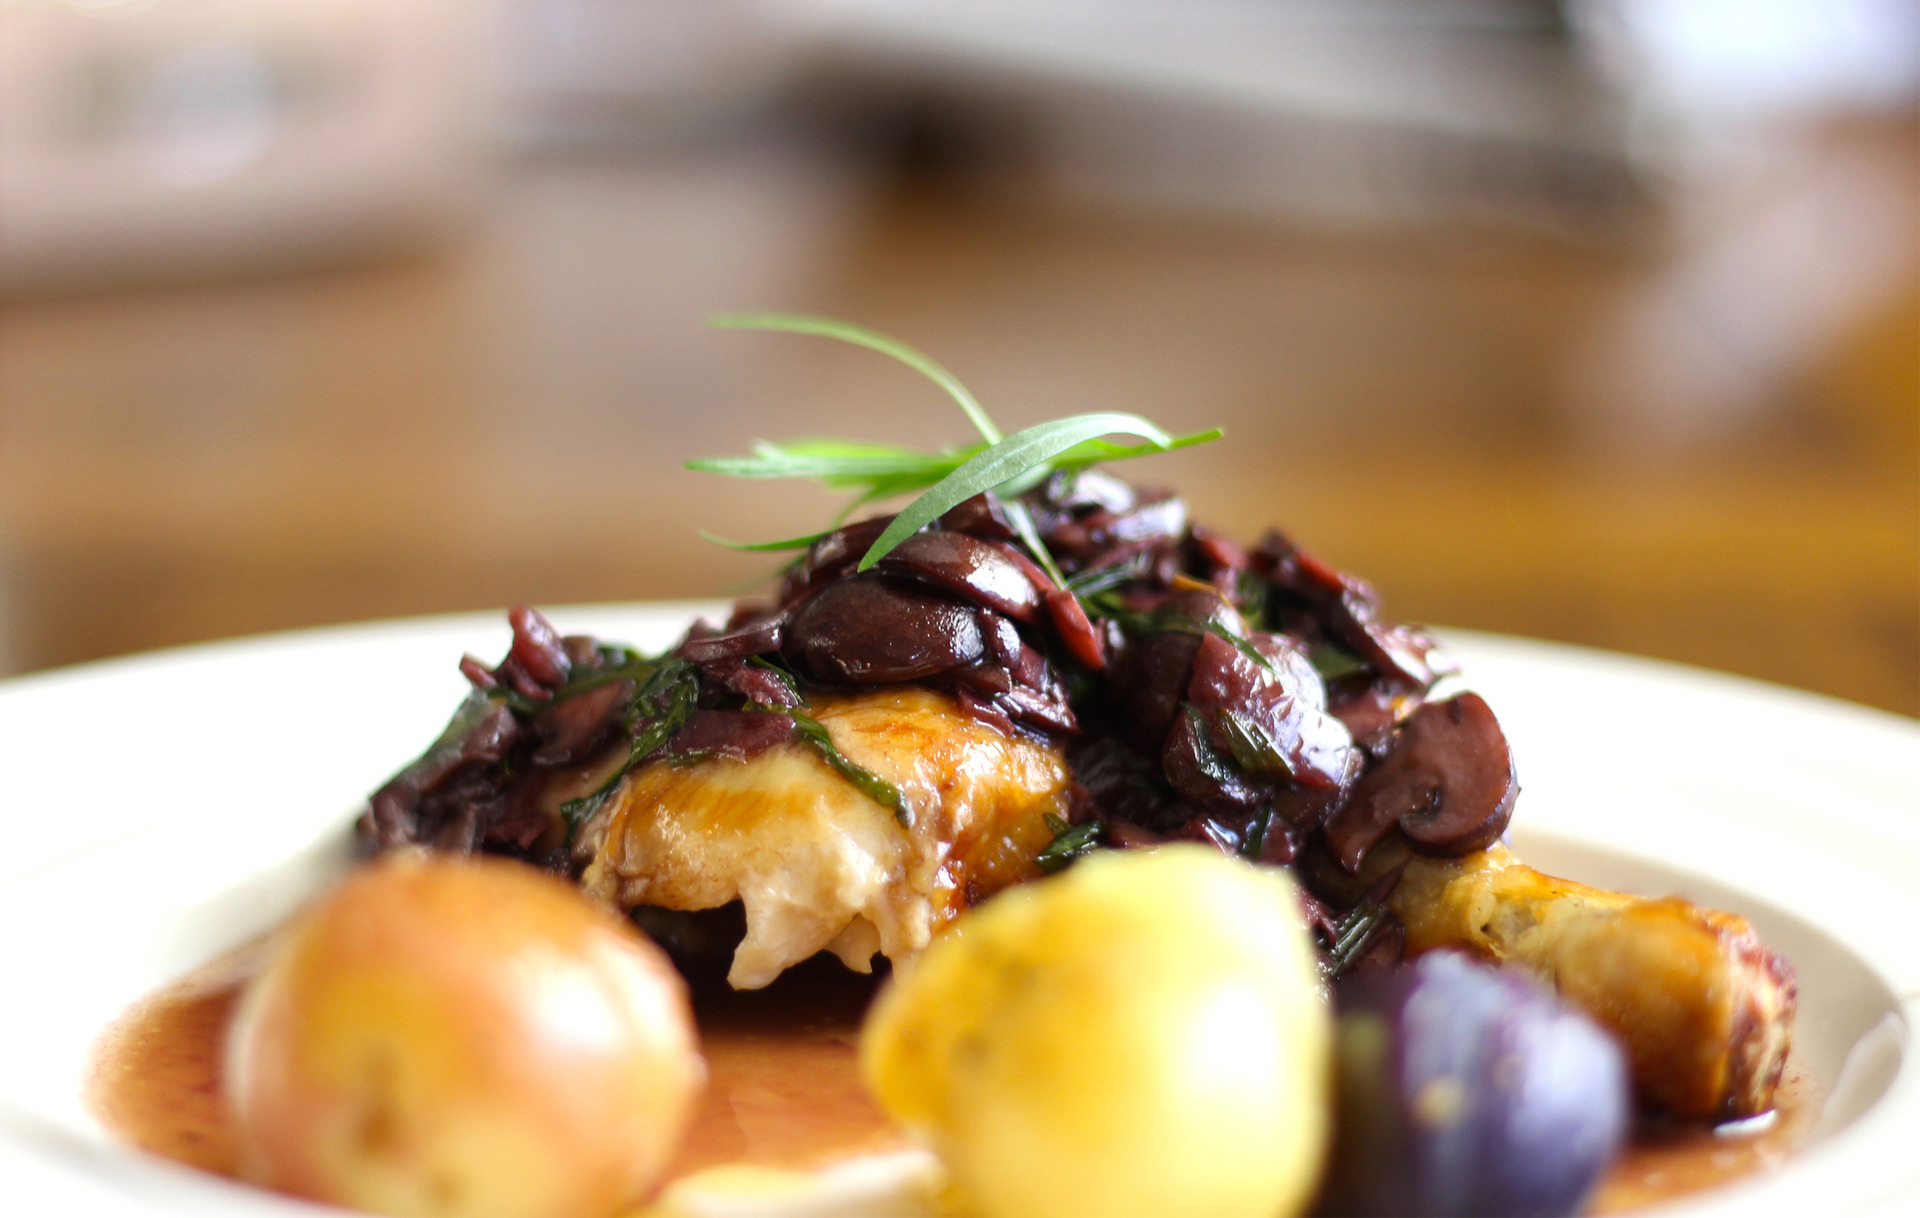 Shallot and red wine sauce - Eat Well Recipe - NZ Herald